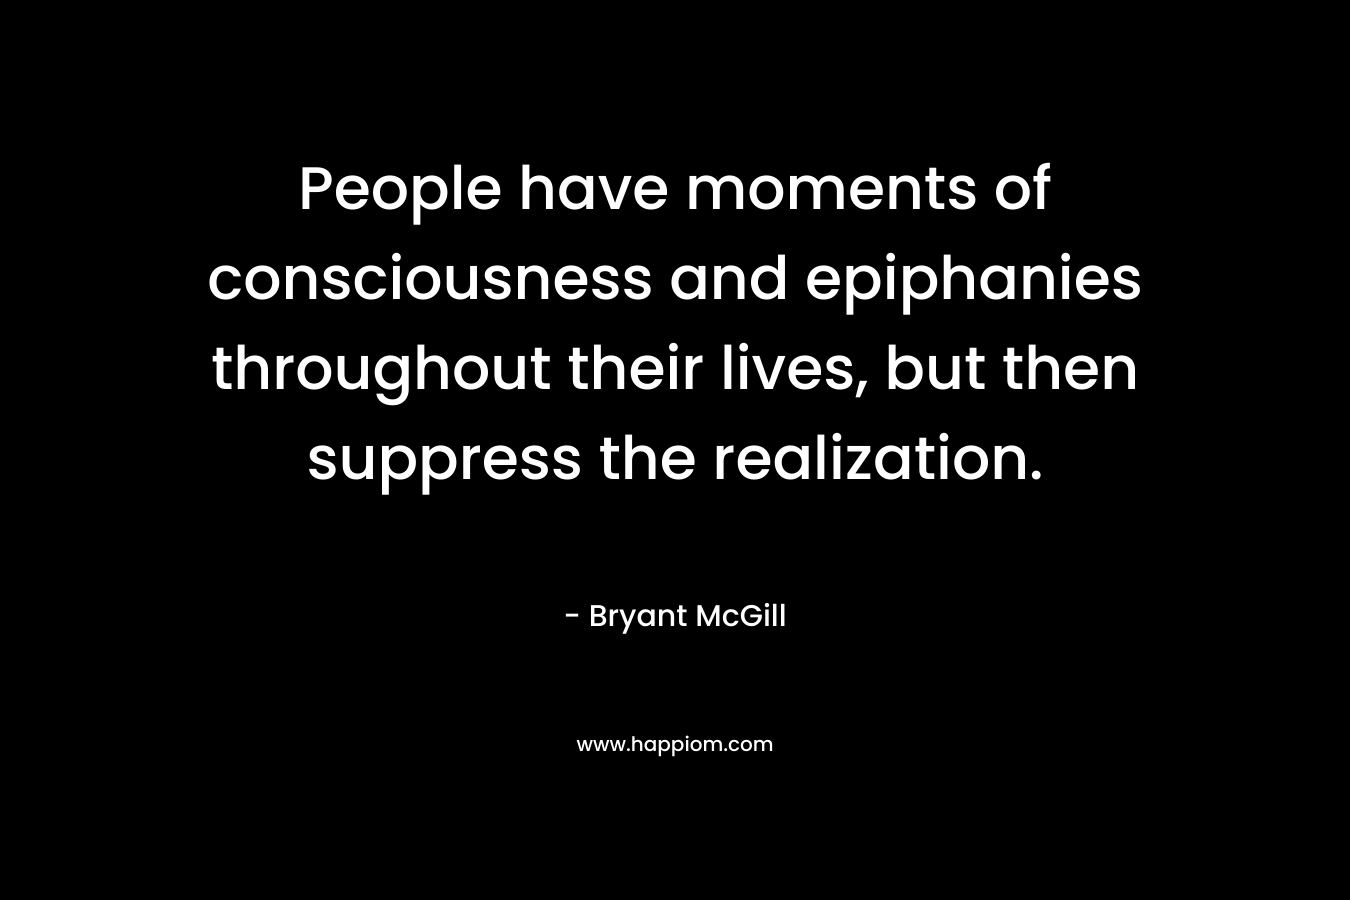 People have moments of consciousness and epiphanies throughout their lives, but then suppress the realization.